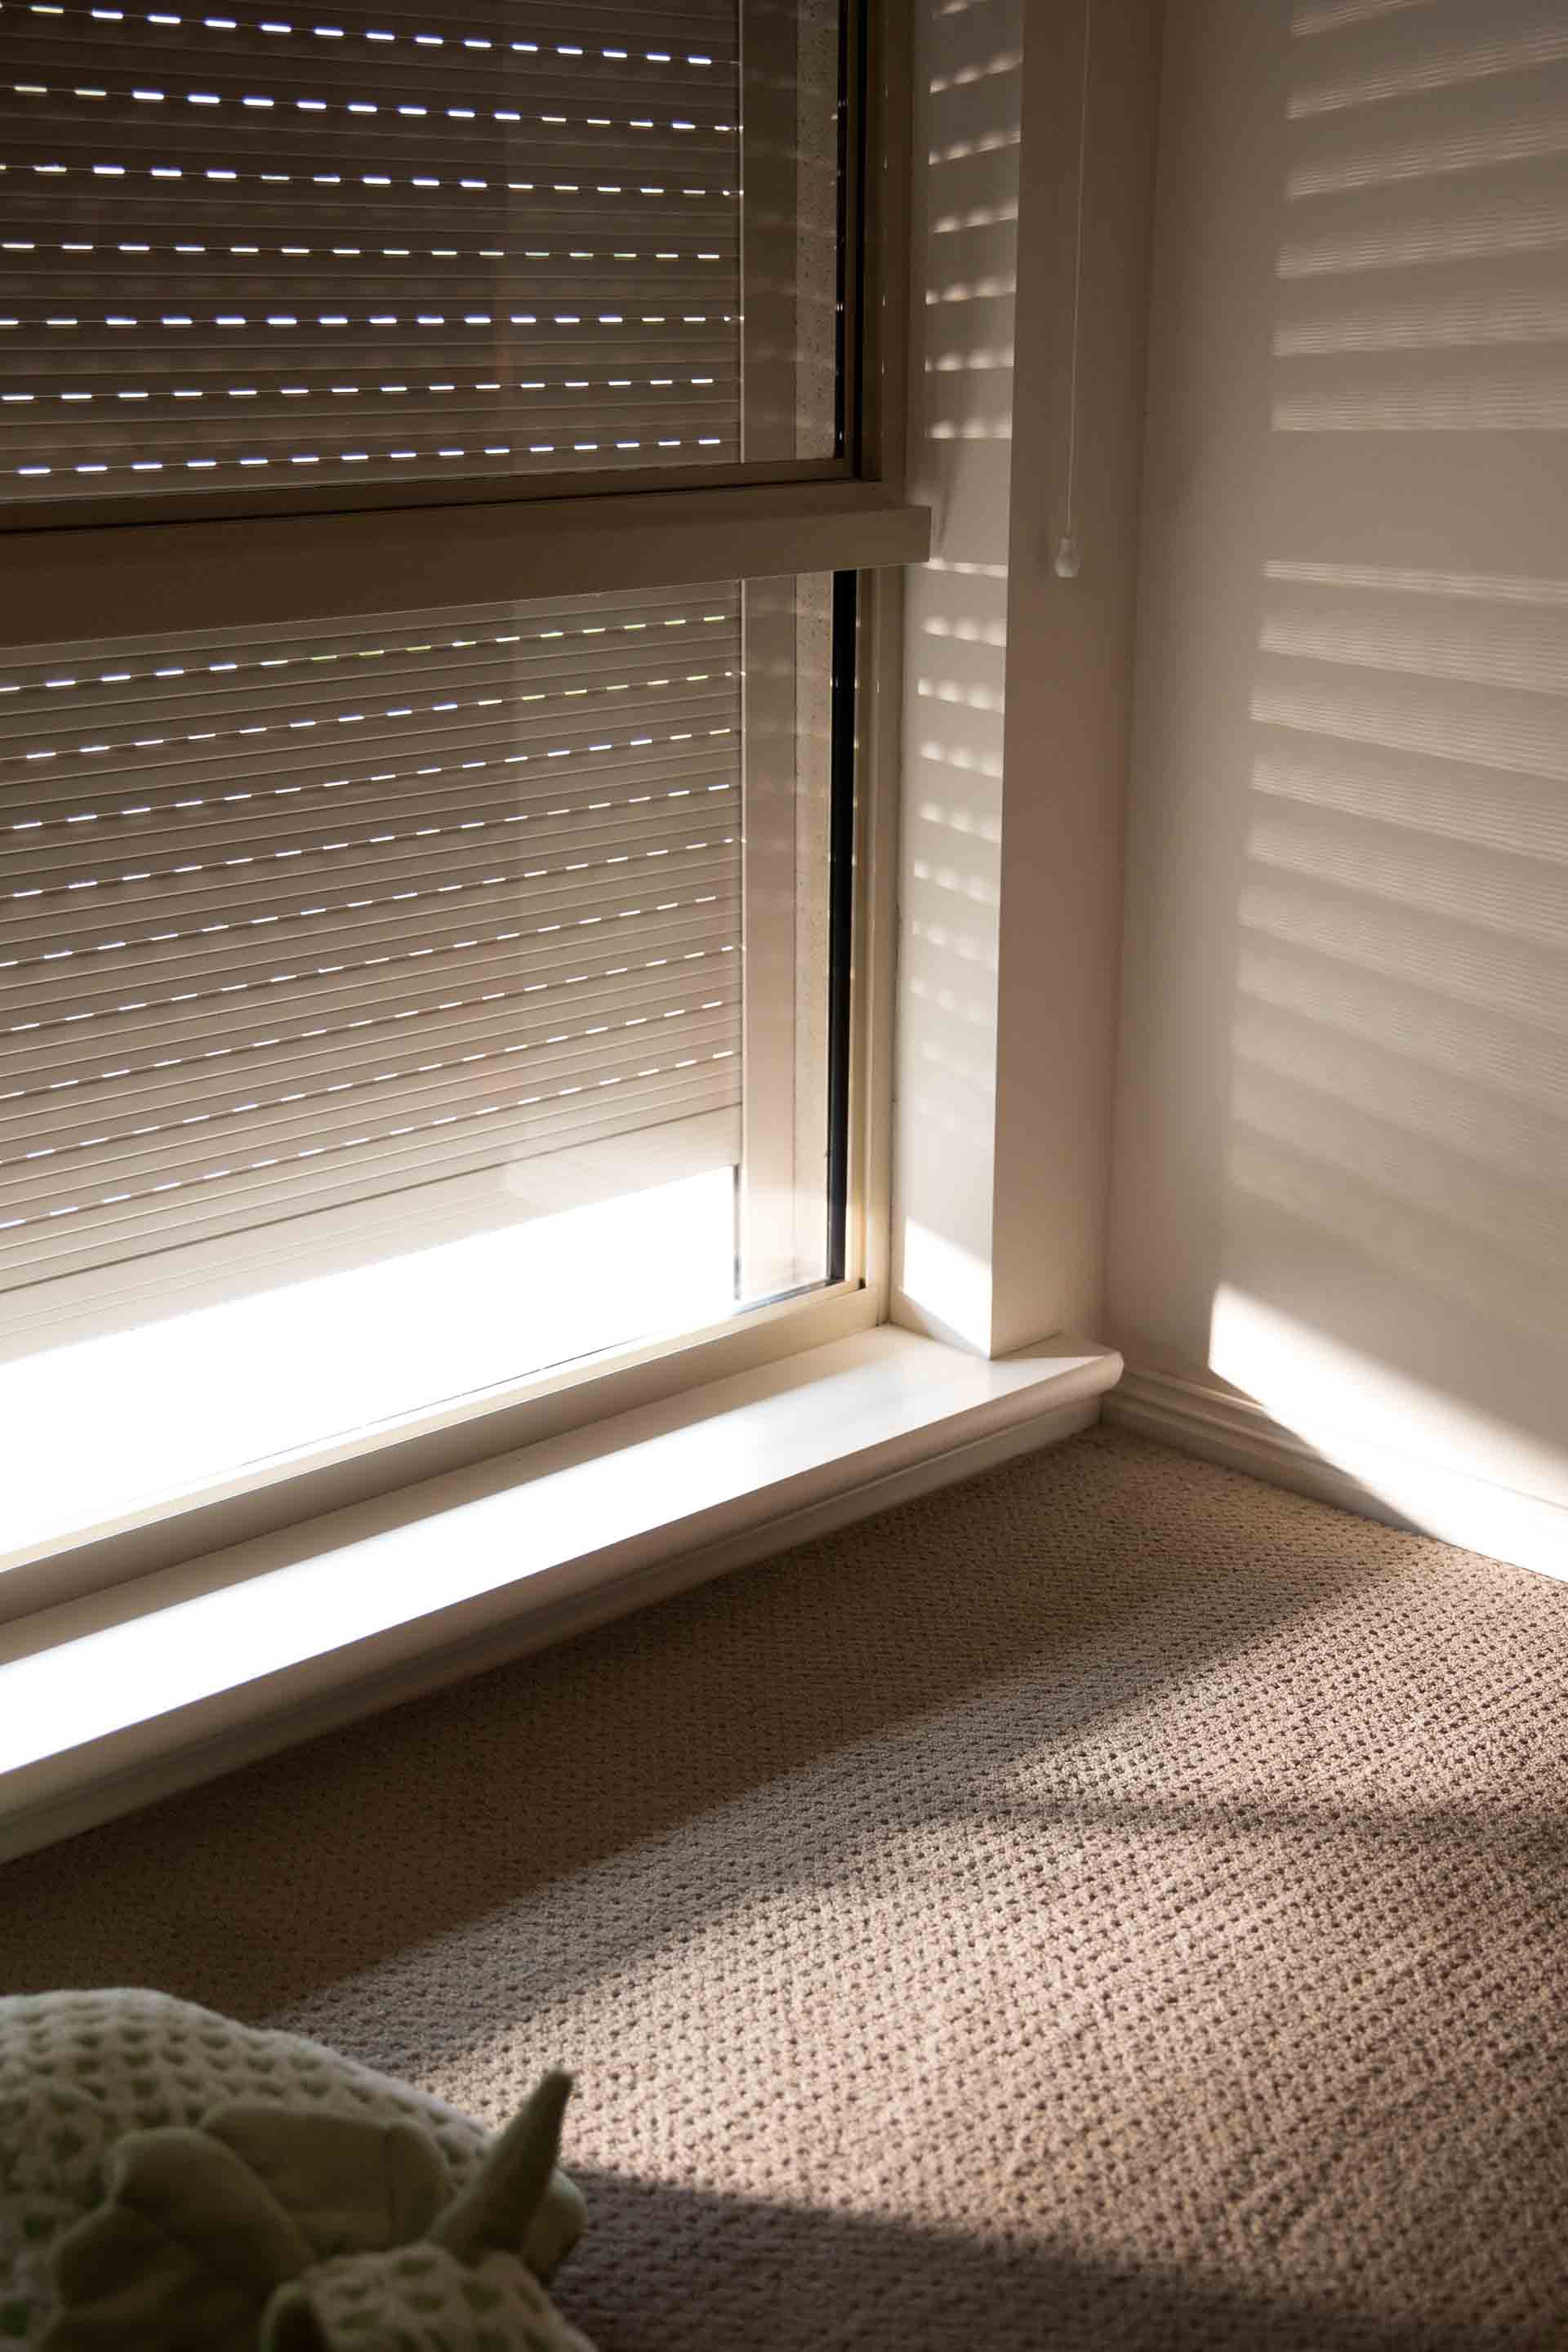 Beat the heat in your home: How to survive summer in Australia - Roller shutters are a great way to control the temperature inside your home, Australian Outdoor Living.